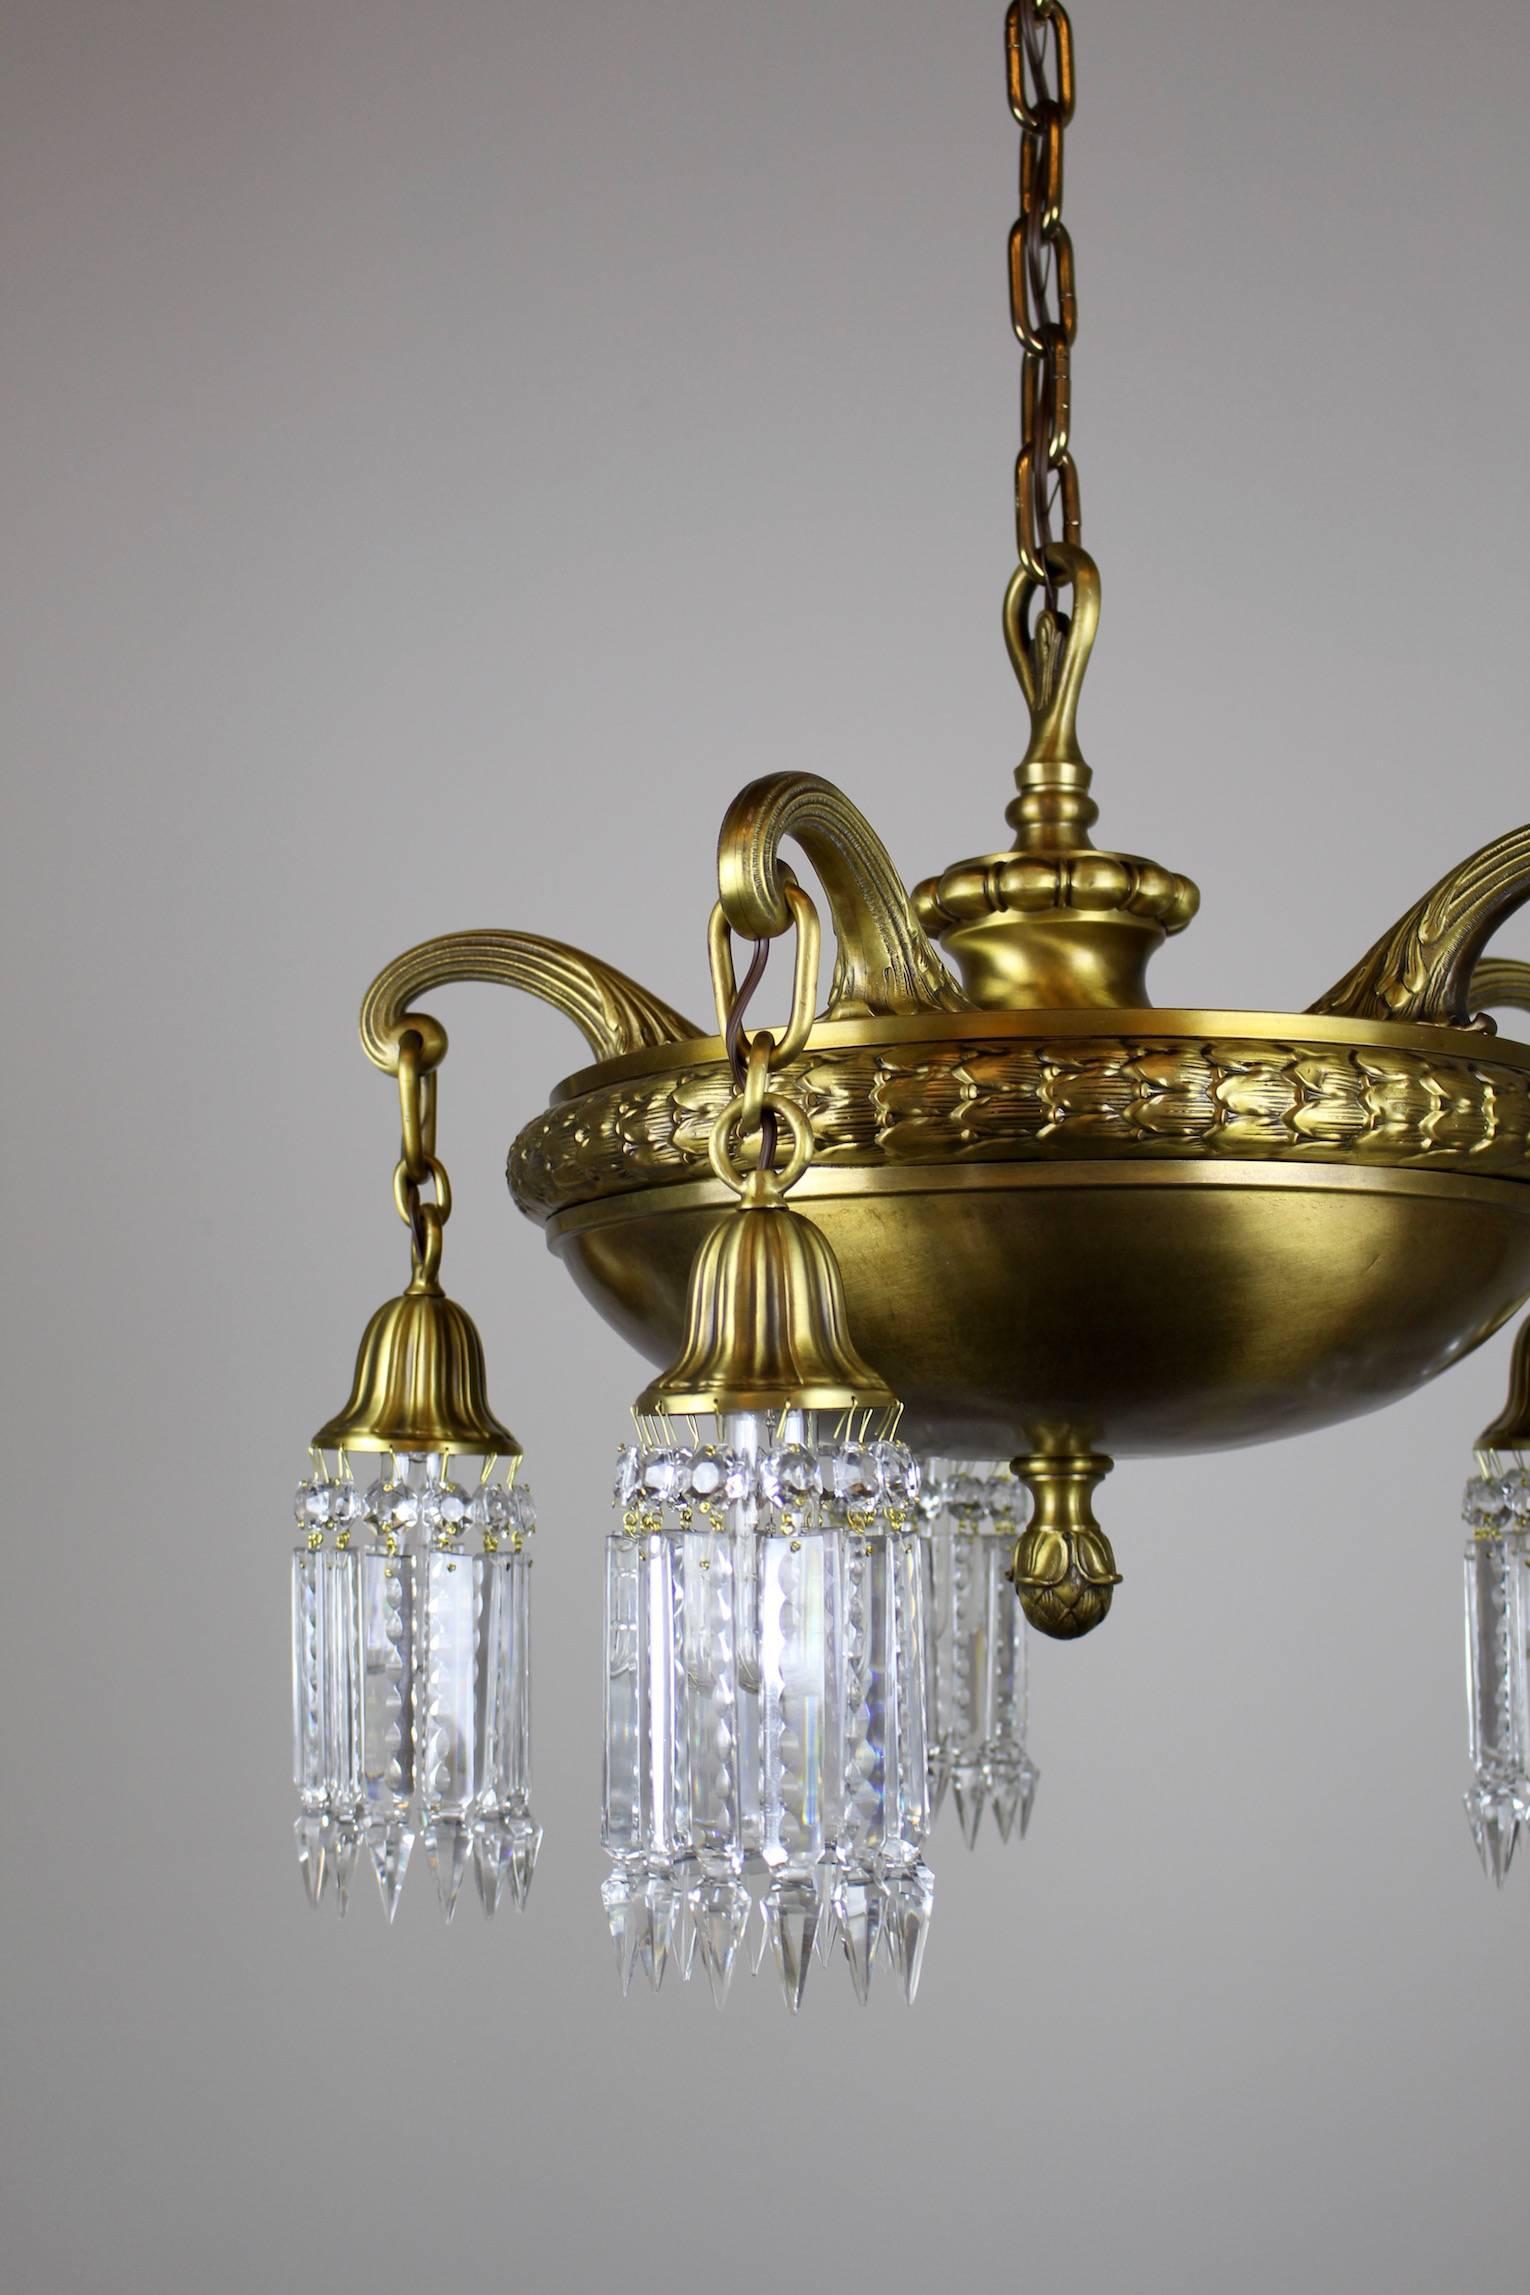 A killer crystal chandelier in the Beaux Arts style, circa 1910. Five arms, fitted with notched crystal. This bank style light has hearty brass body with beautiful castings around the rim. Rewired and restored, ready to hang.  Measurements: 49"